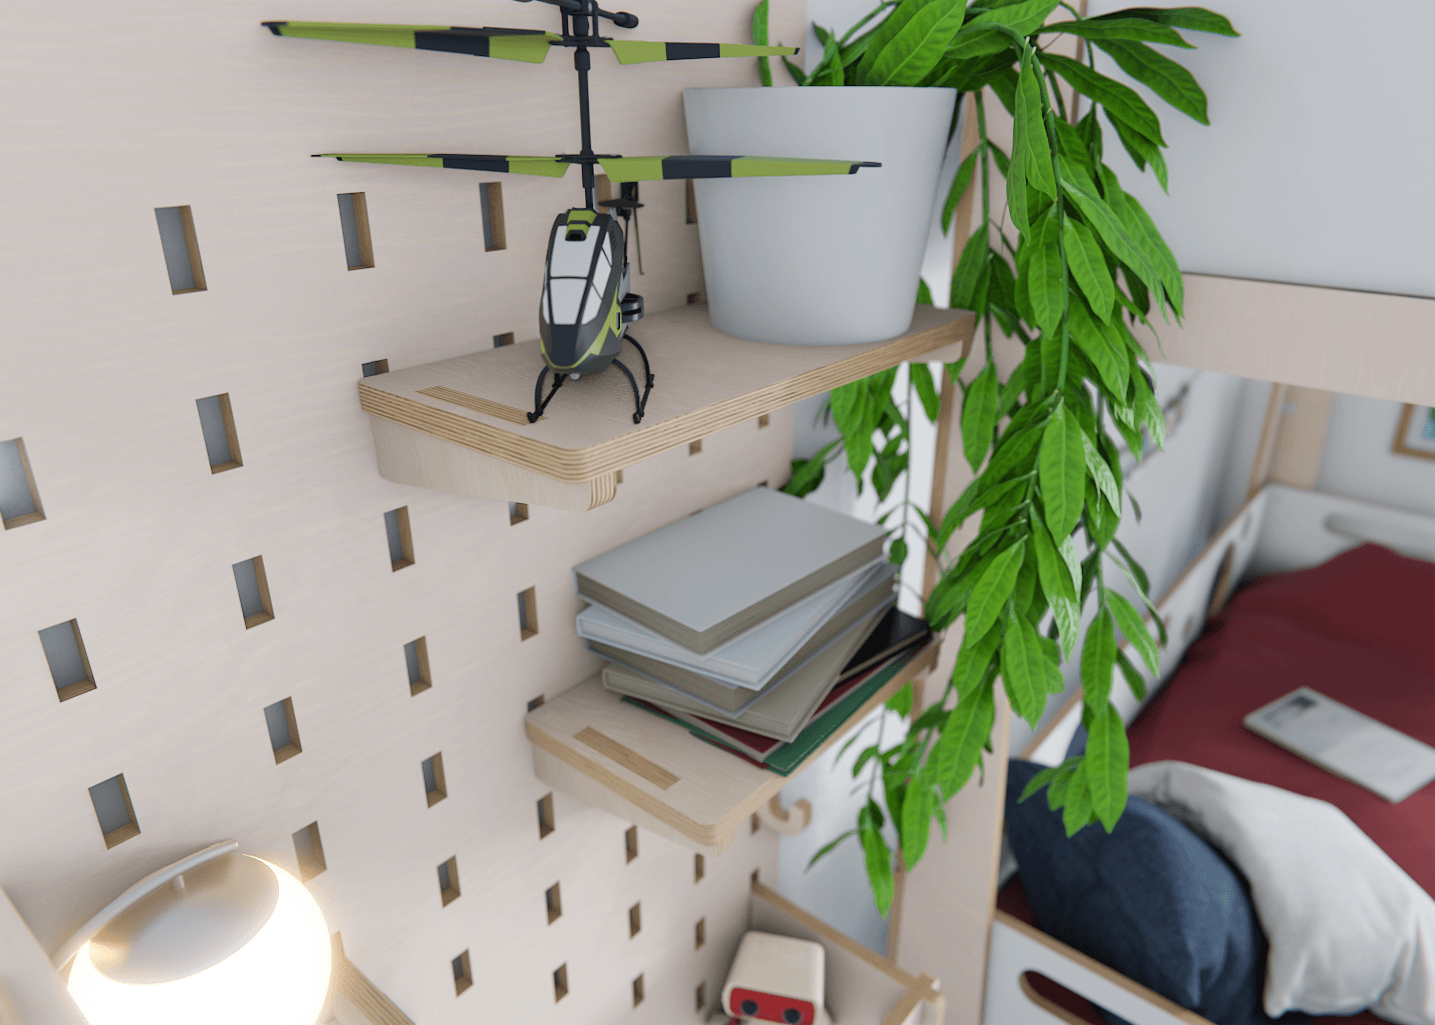 Embrace organized efficiency with our foldable desk and plywood pegboard. A must-have for a neat, adaptable space!